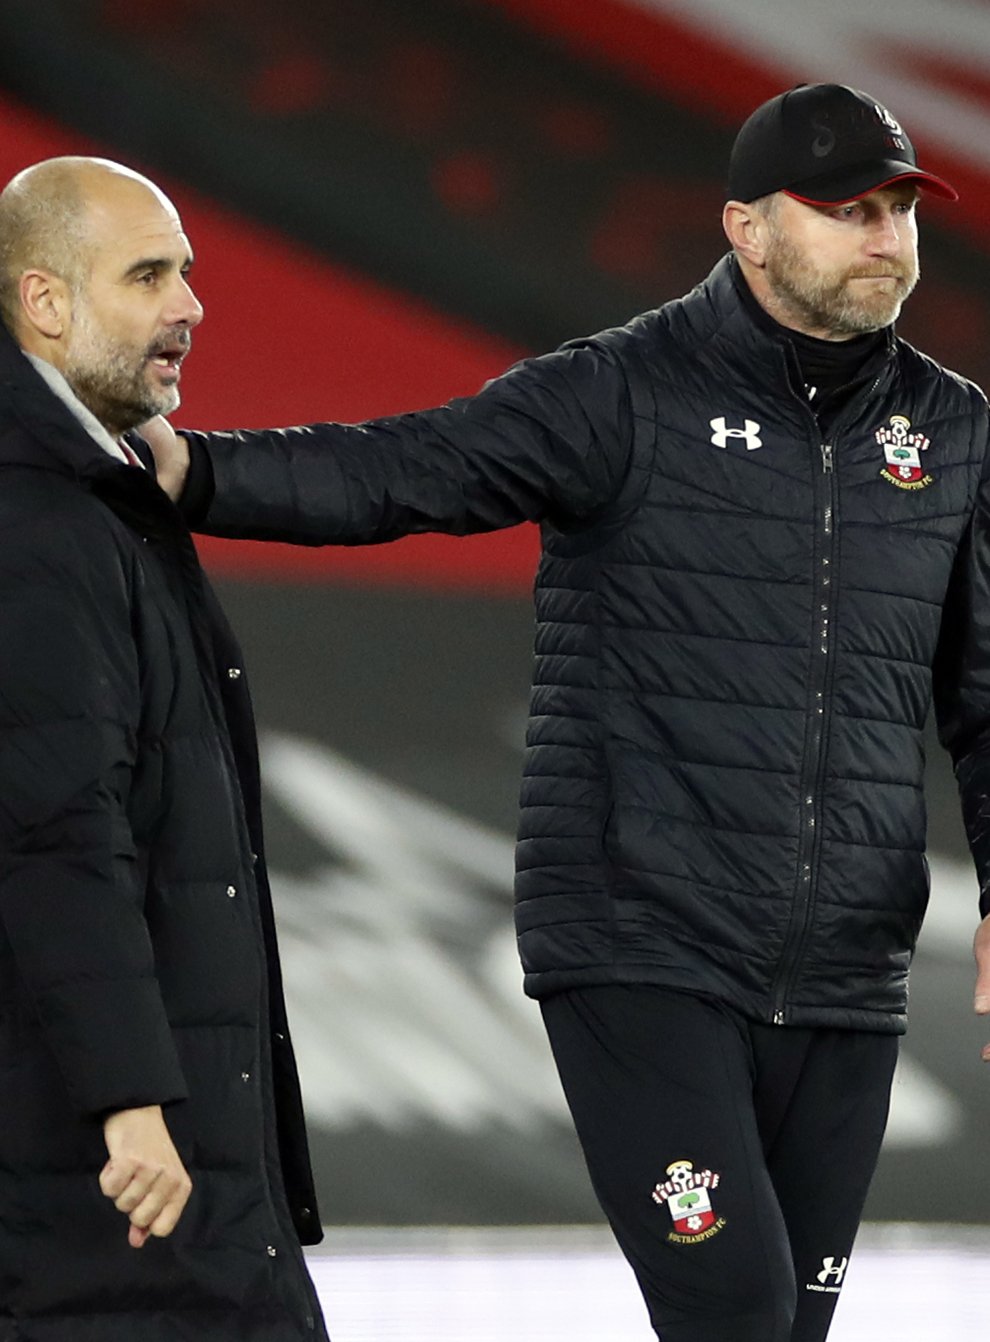 Southampton manager Ralph Hasenhutt, right, believes Pep Guardiola’s Manchester City have already wrapped up the title (Paul Childs/PA)